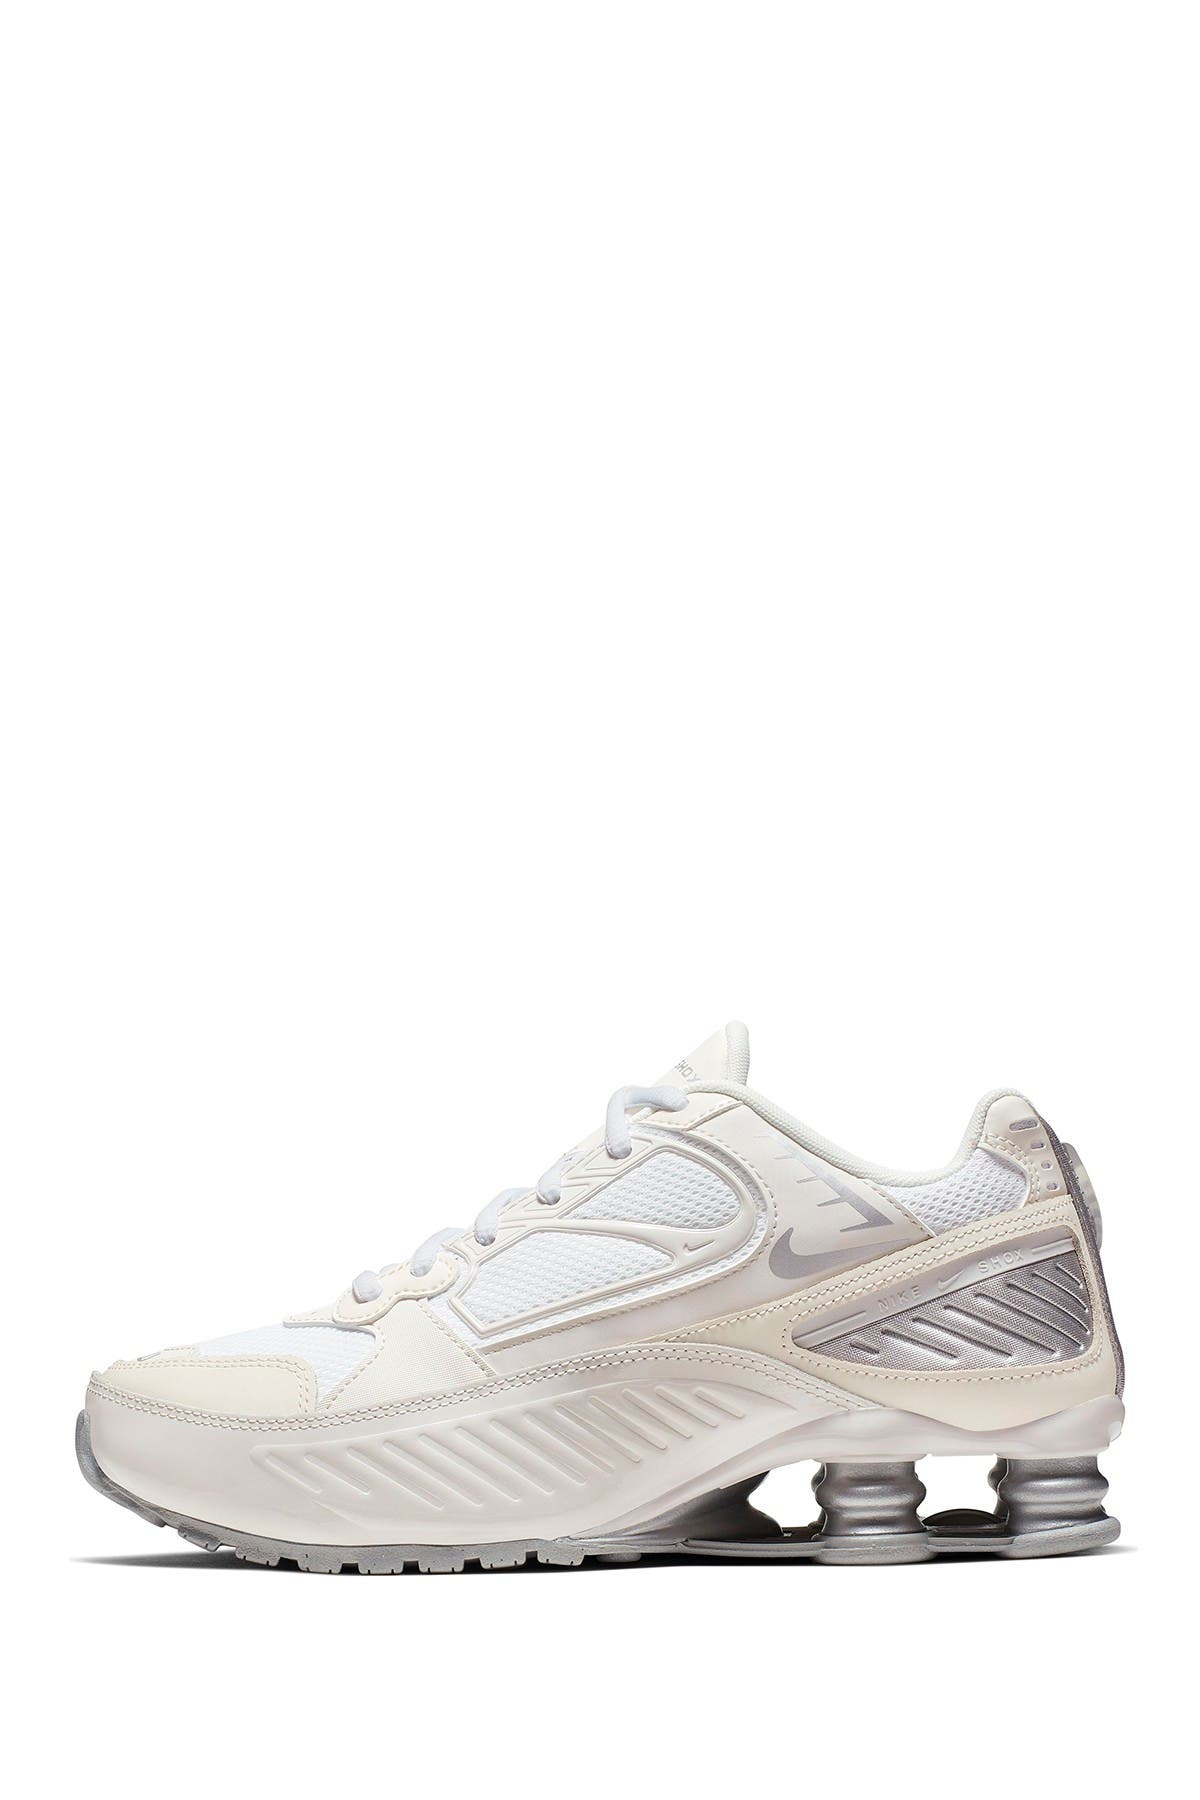 nike cream and silver shox enigma 9000 sneakers